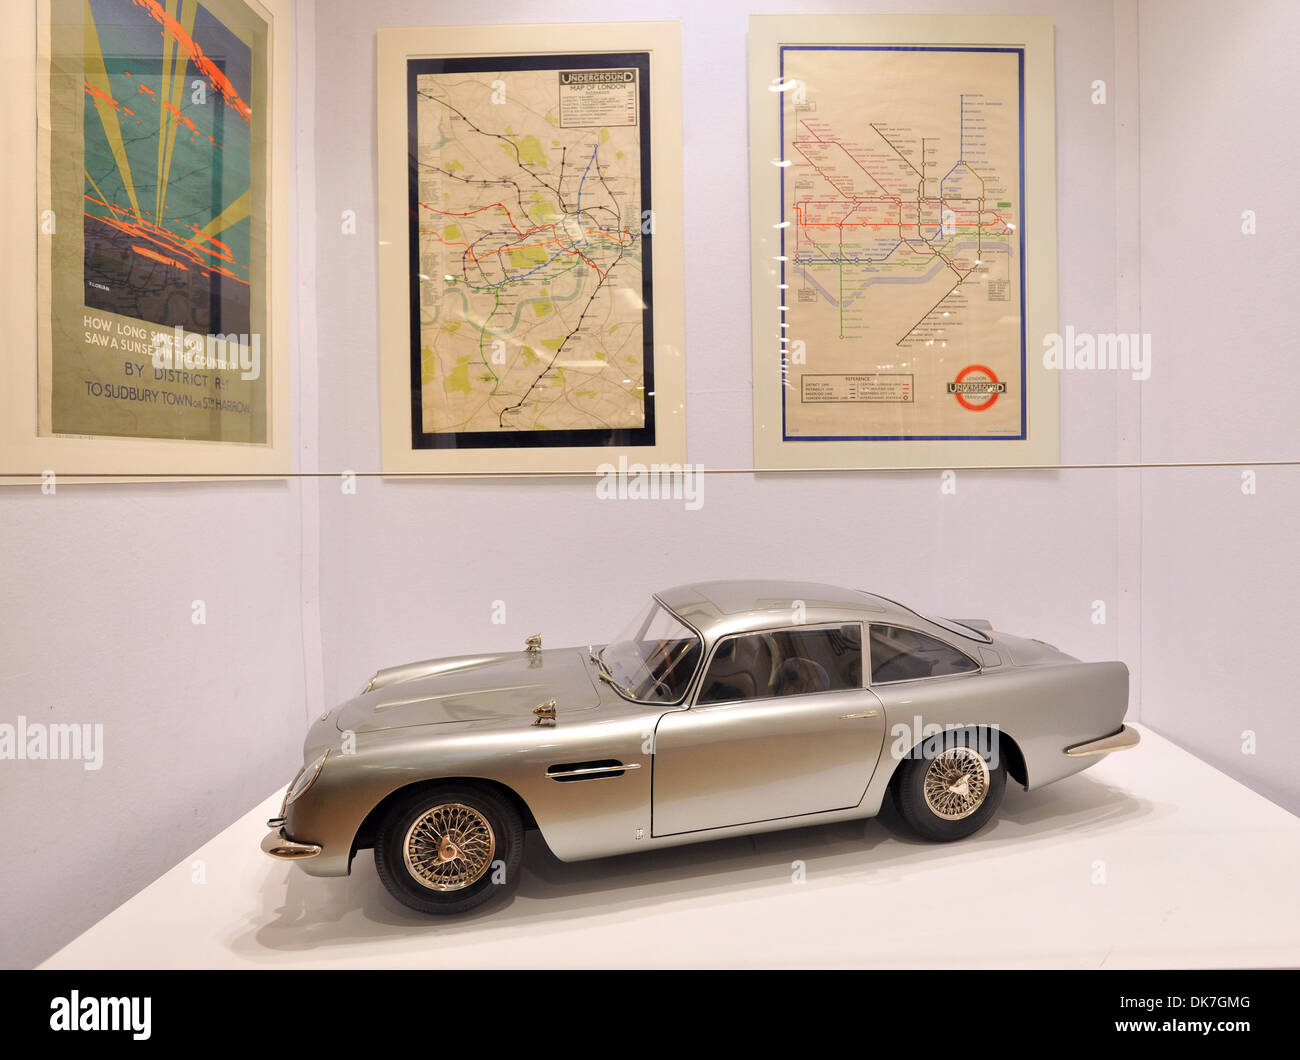 A post-production 1/3 scale replica of Aston Martin DB5 used in Skyfall Estimate £30000-40000 50 Years of James Bond - Press Stock Photo